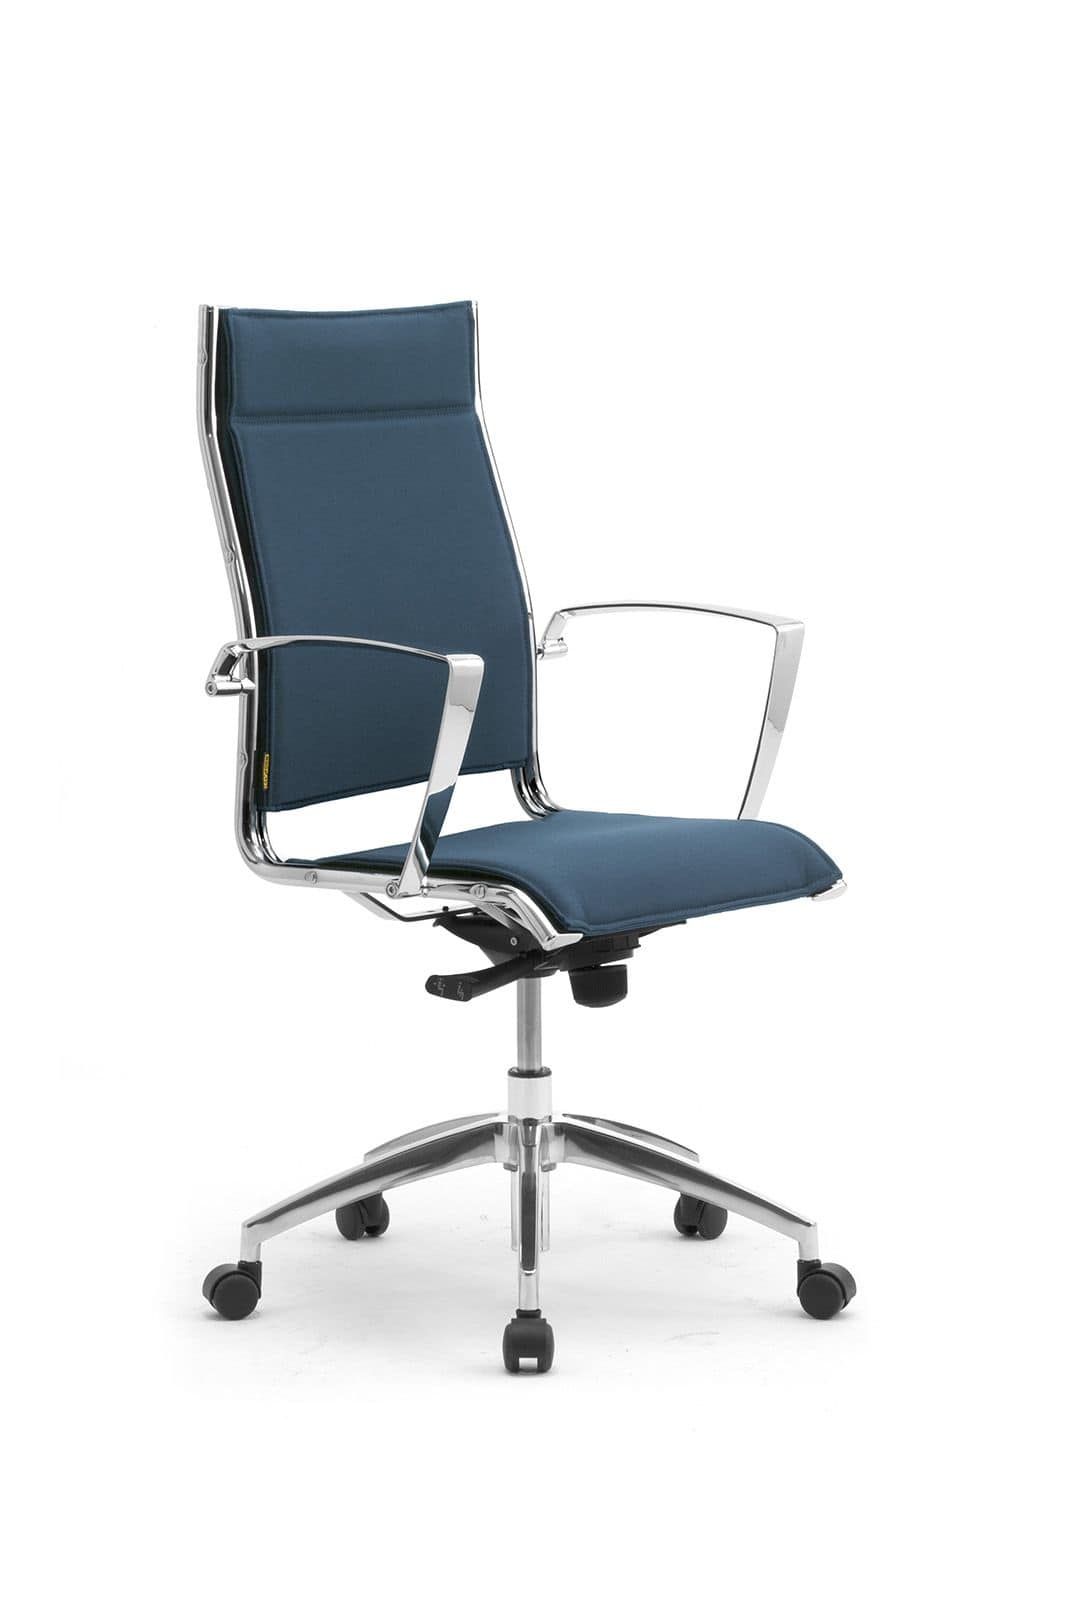 Origami X, Padded chair for office with aluminum armrests